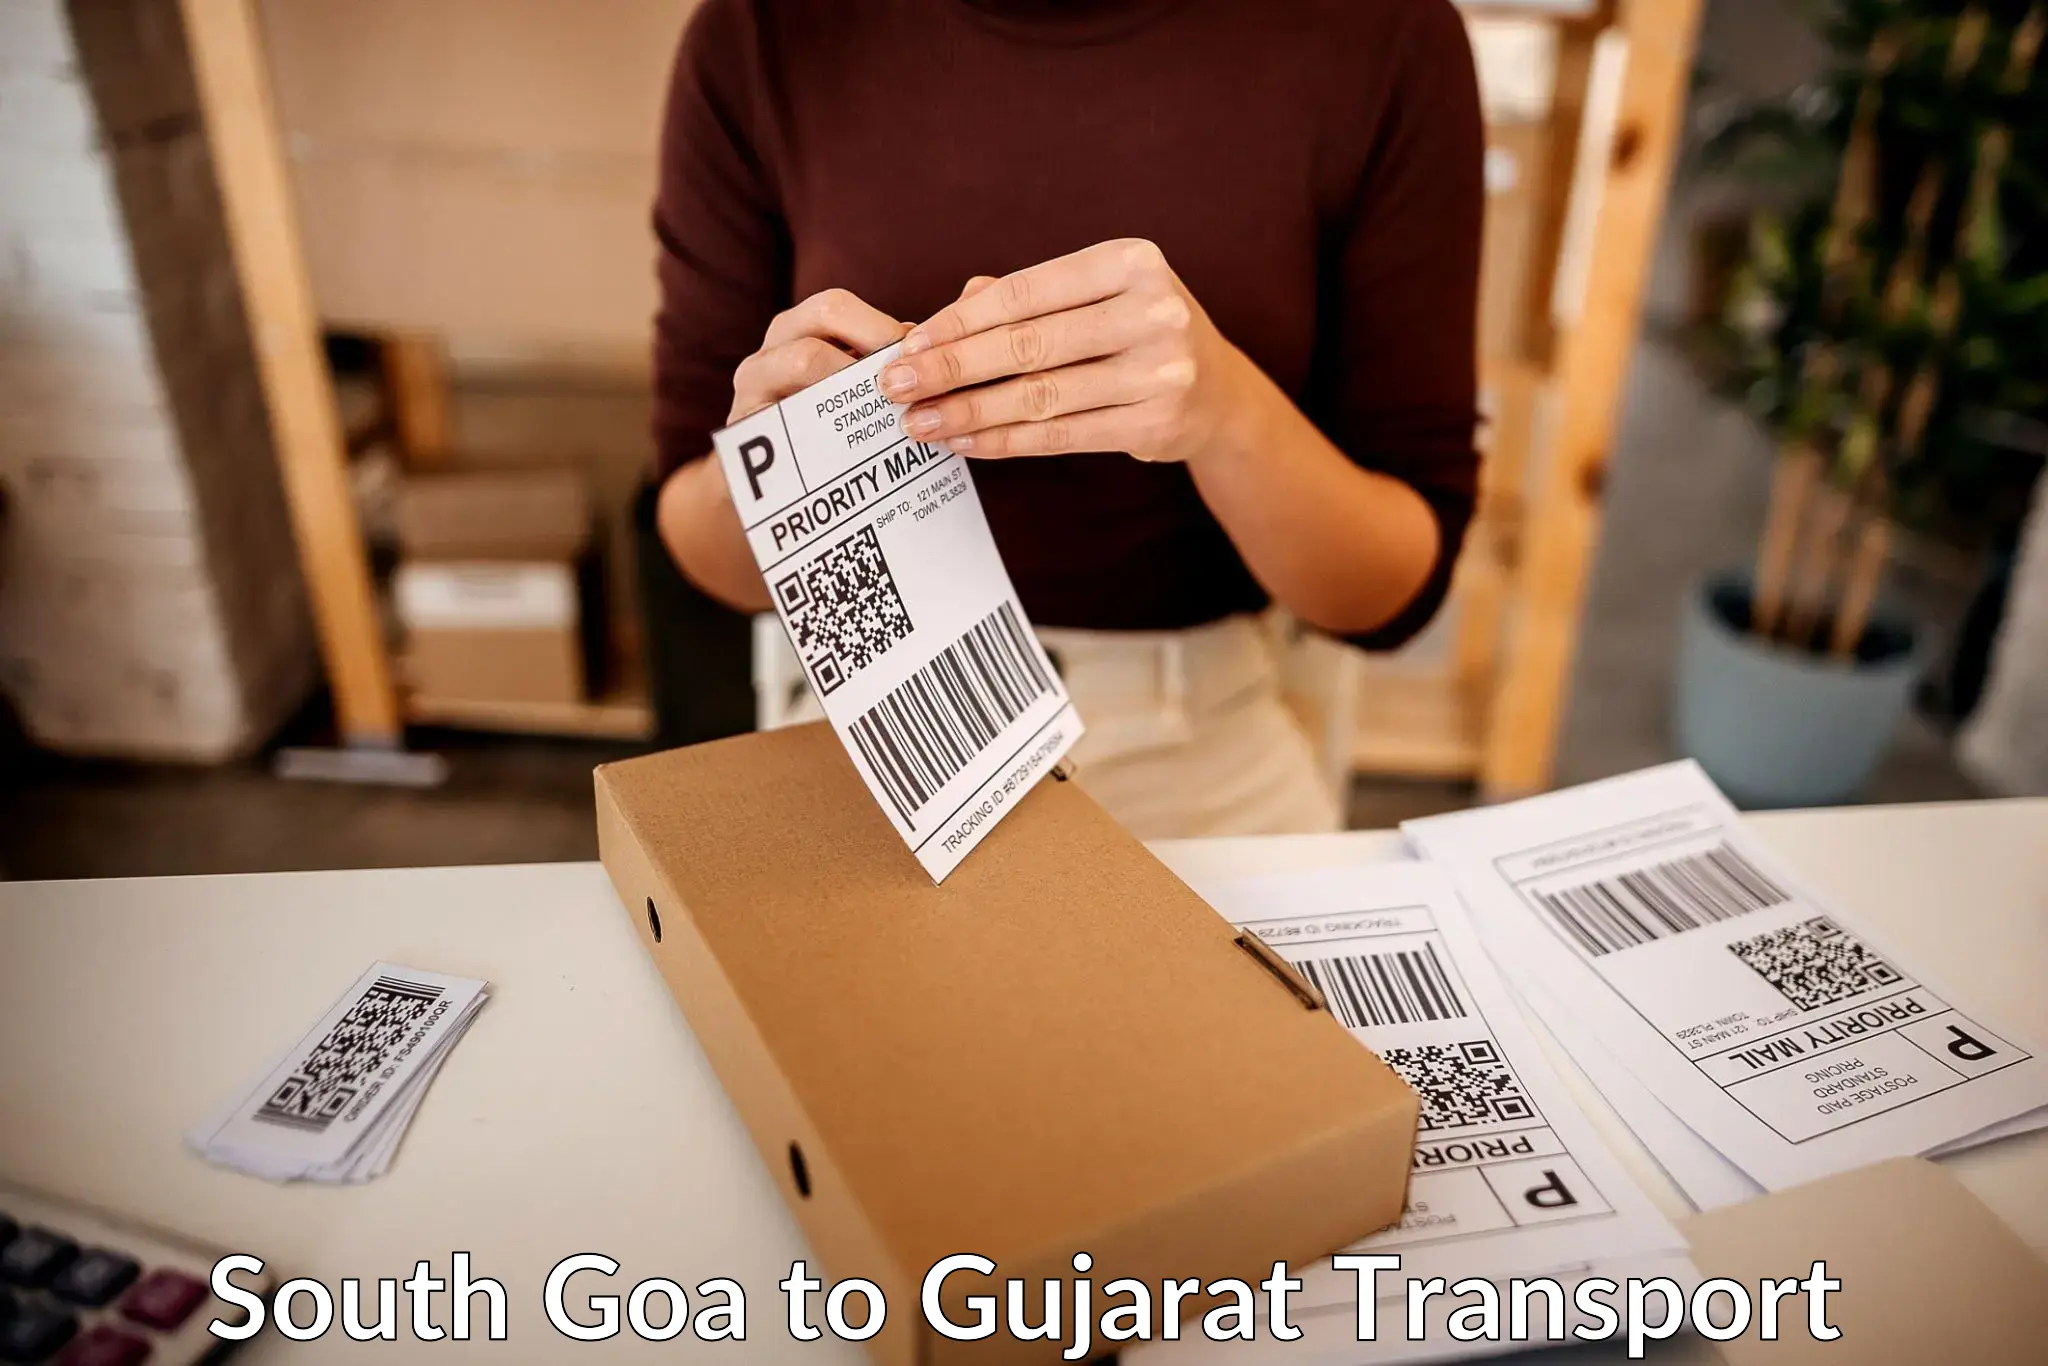 Goods transport services in South Goa to Lunawada